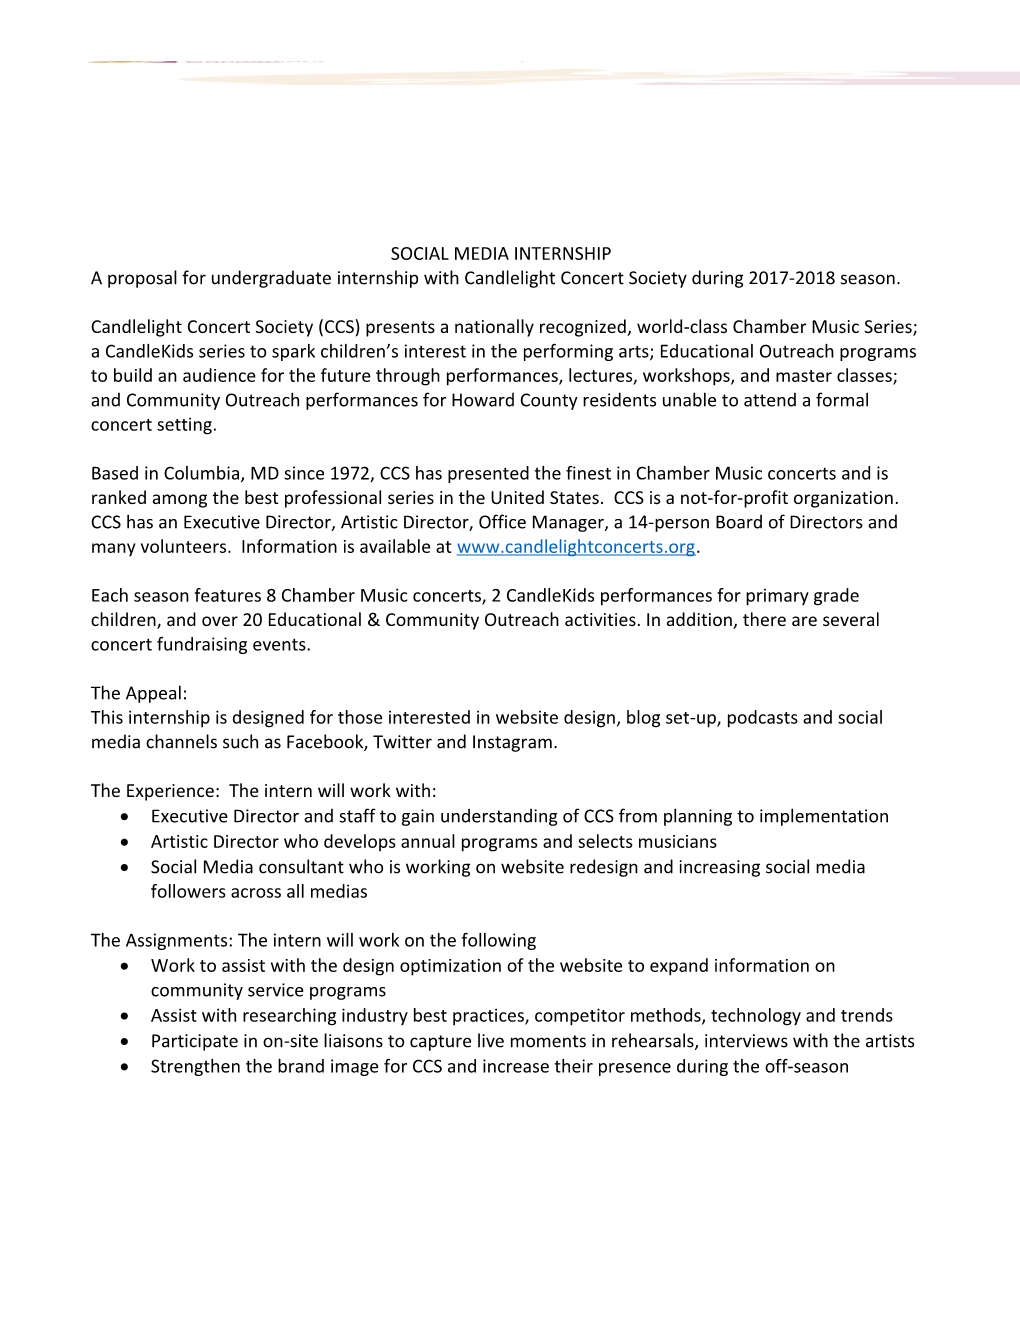 A Proposal for Undergraduate Internship with Candlelight Concert Society During 2017-2018